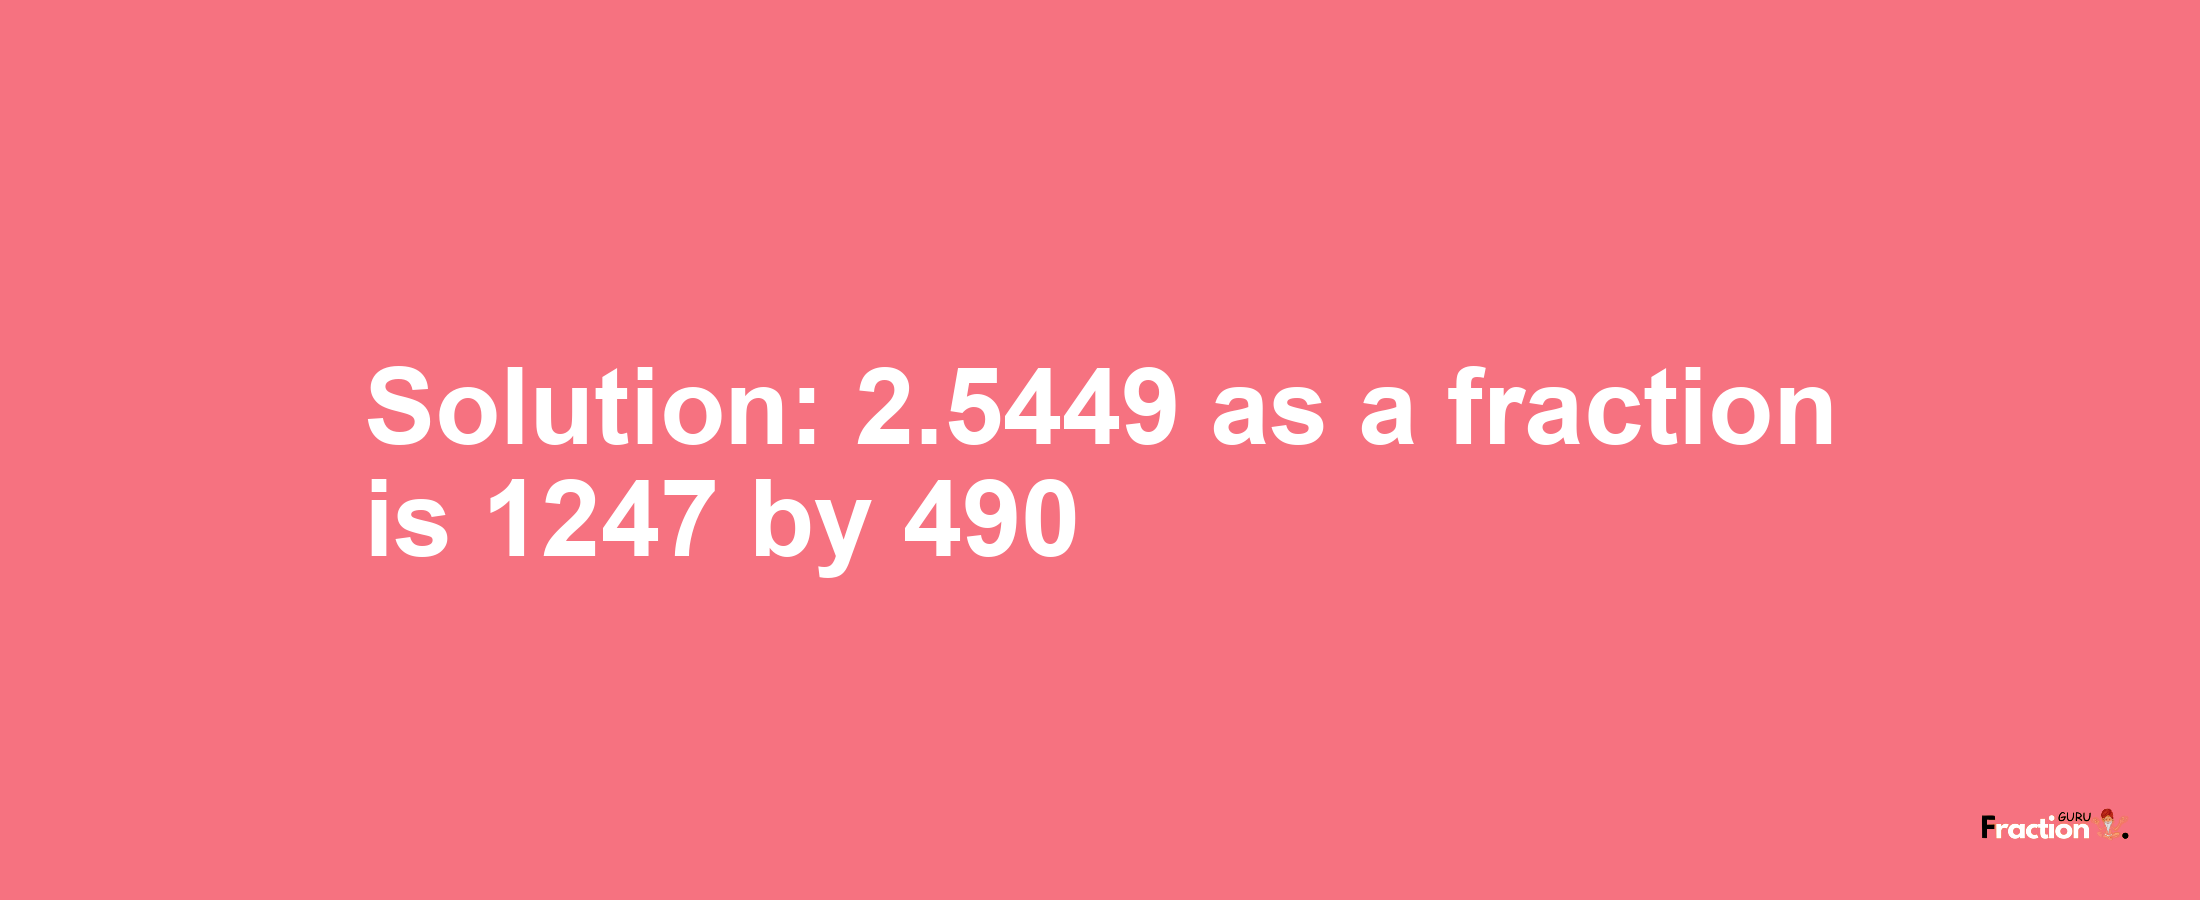 Solution:2.5449 as a fraction is 1247/490